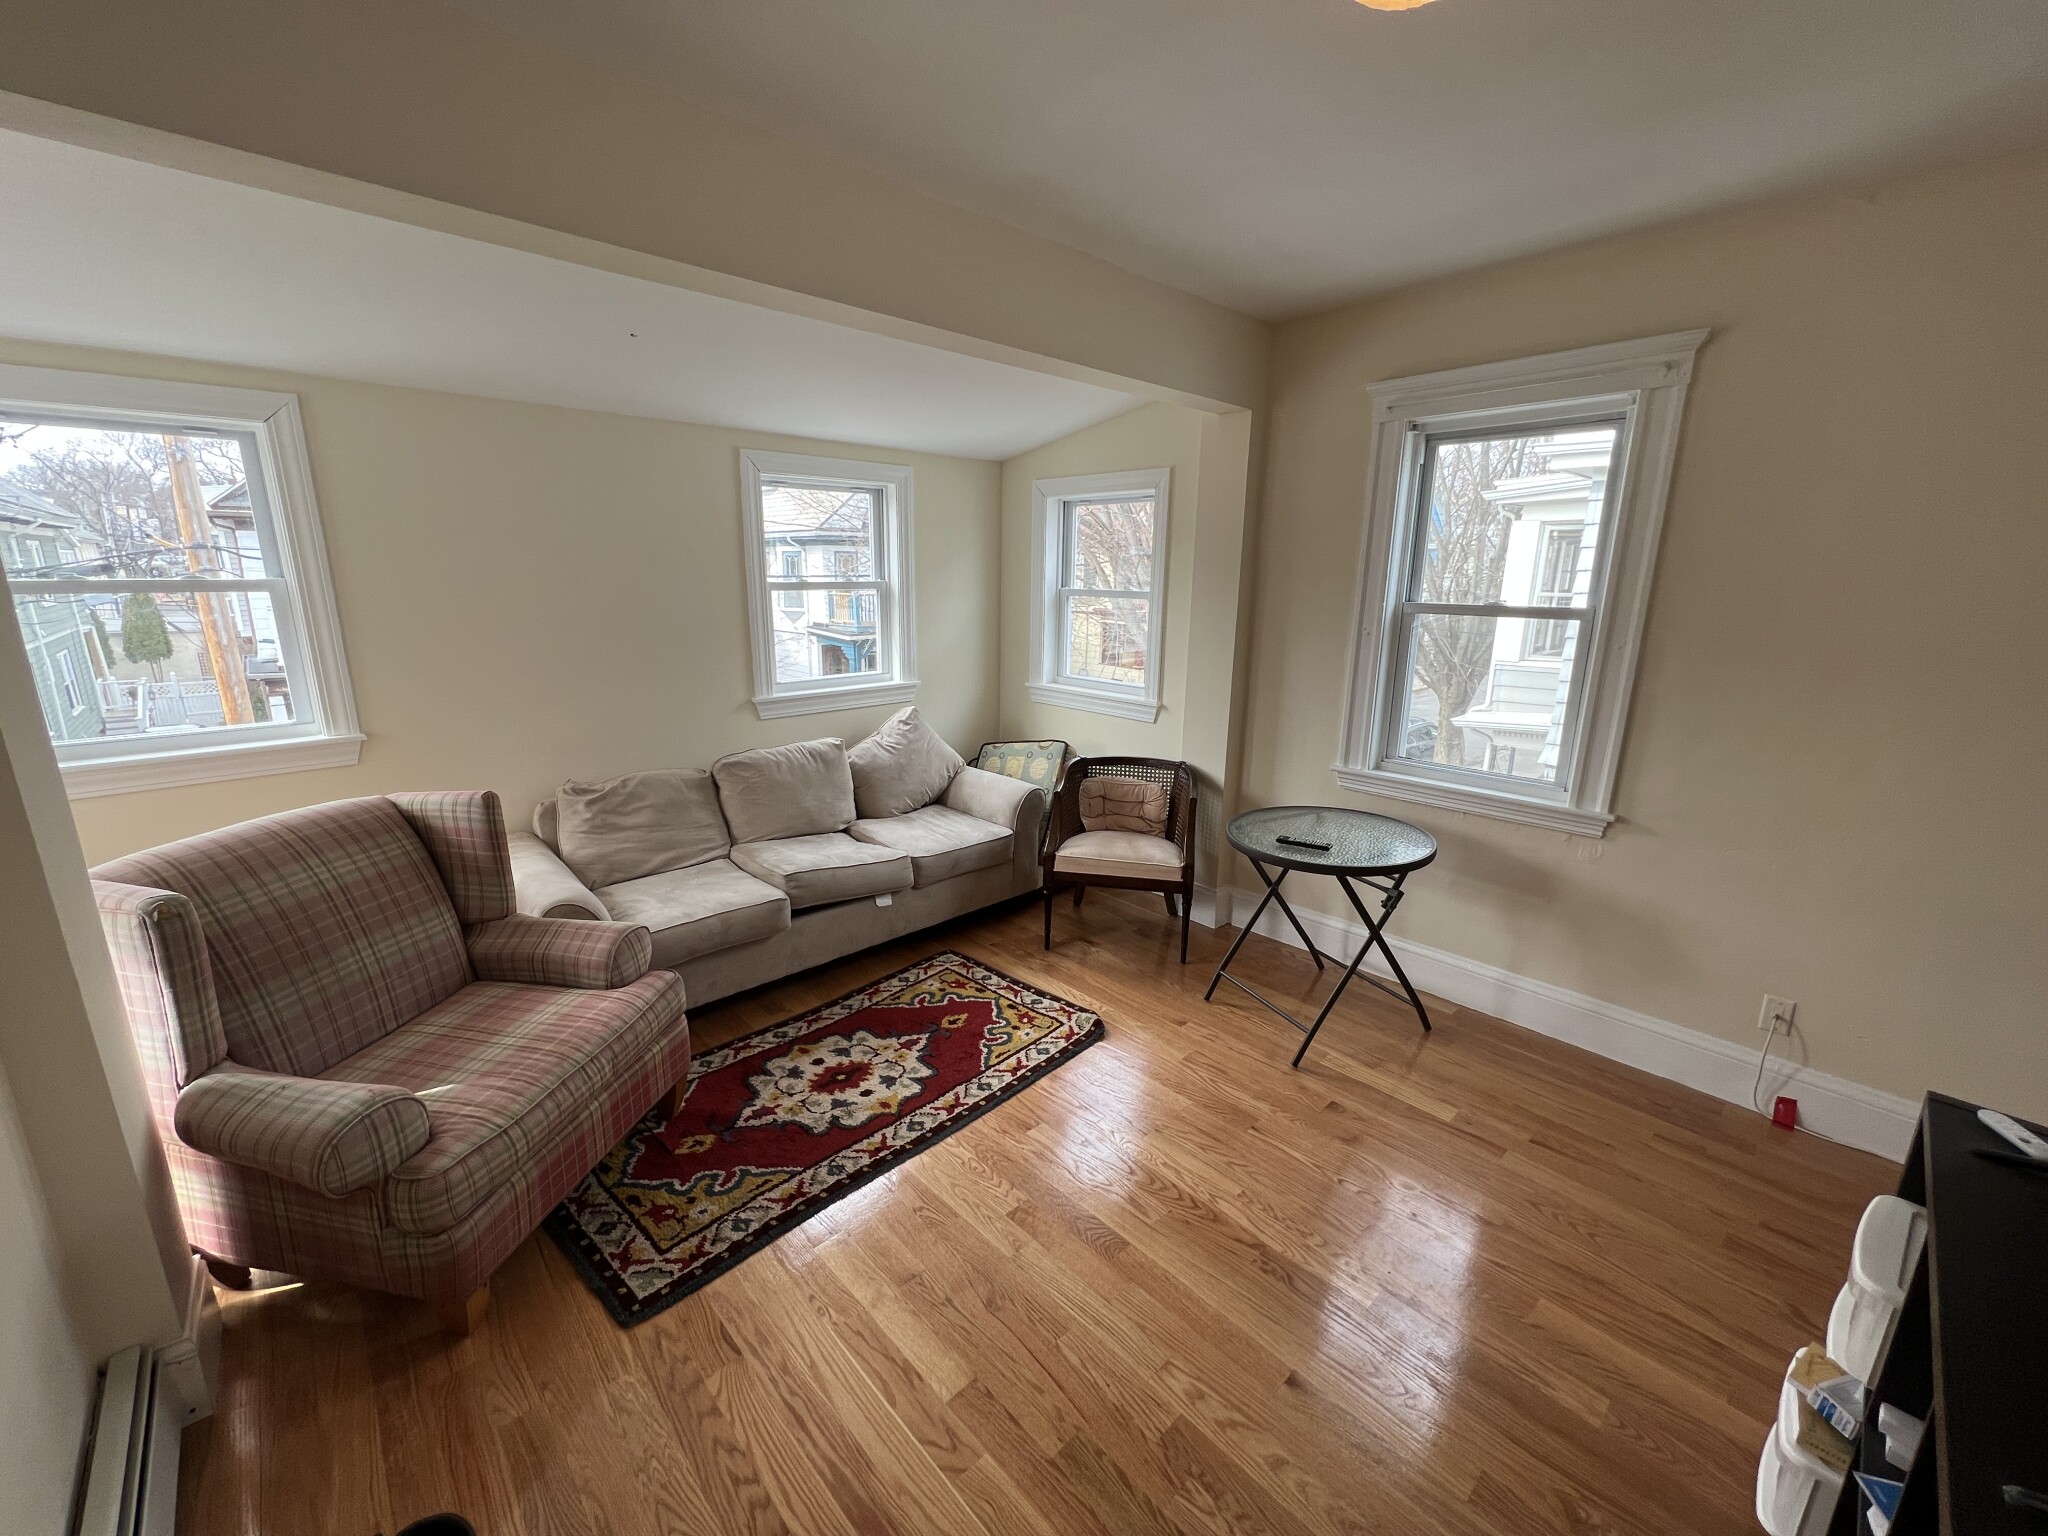 Photos of apartment on Mcgrath Highway,Somerville MA 02143